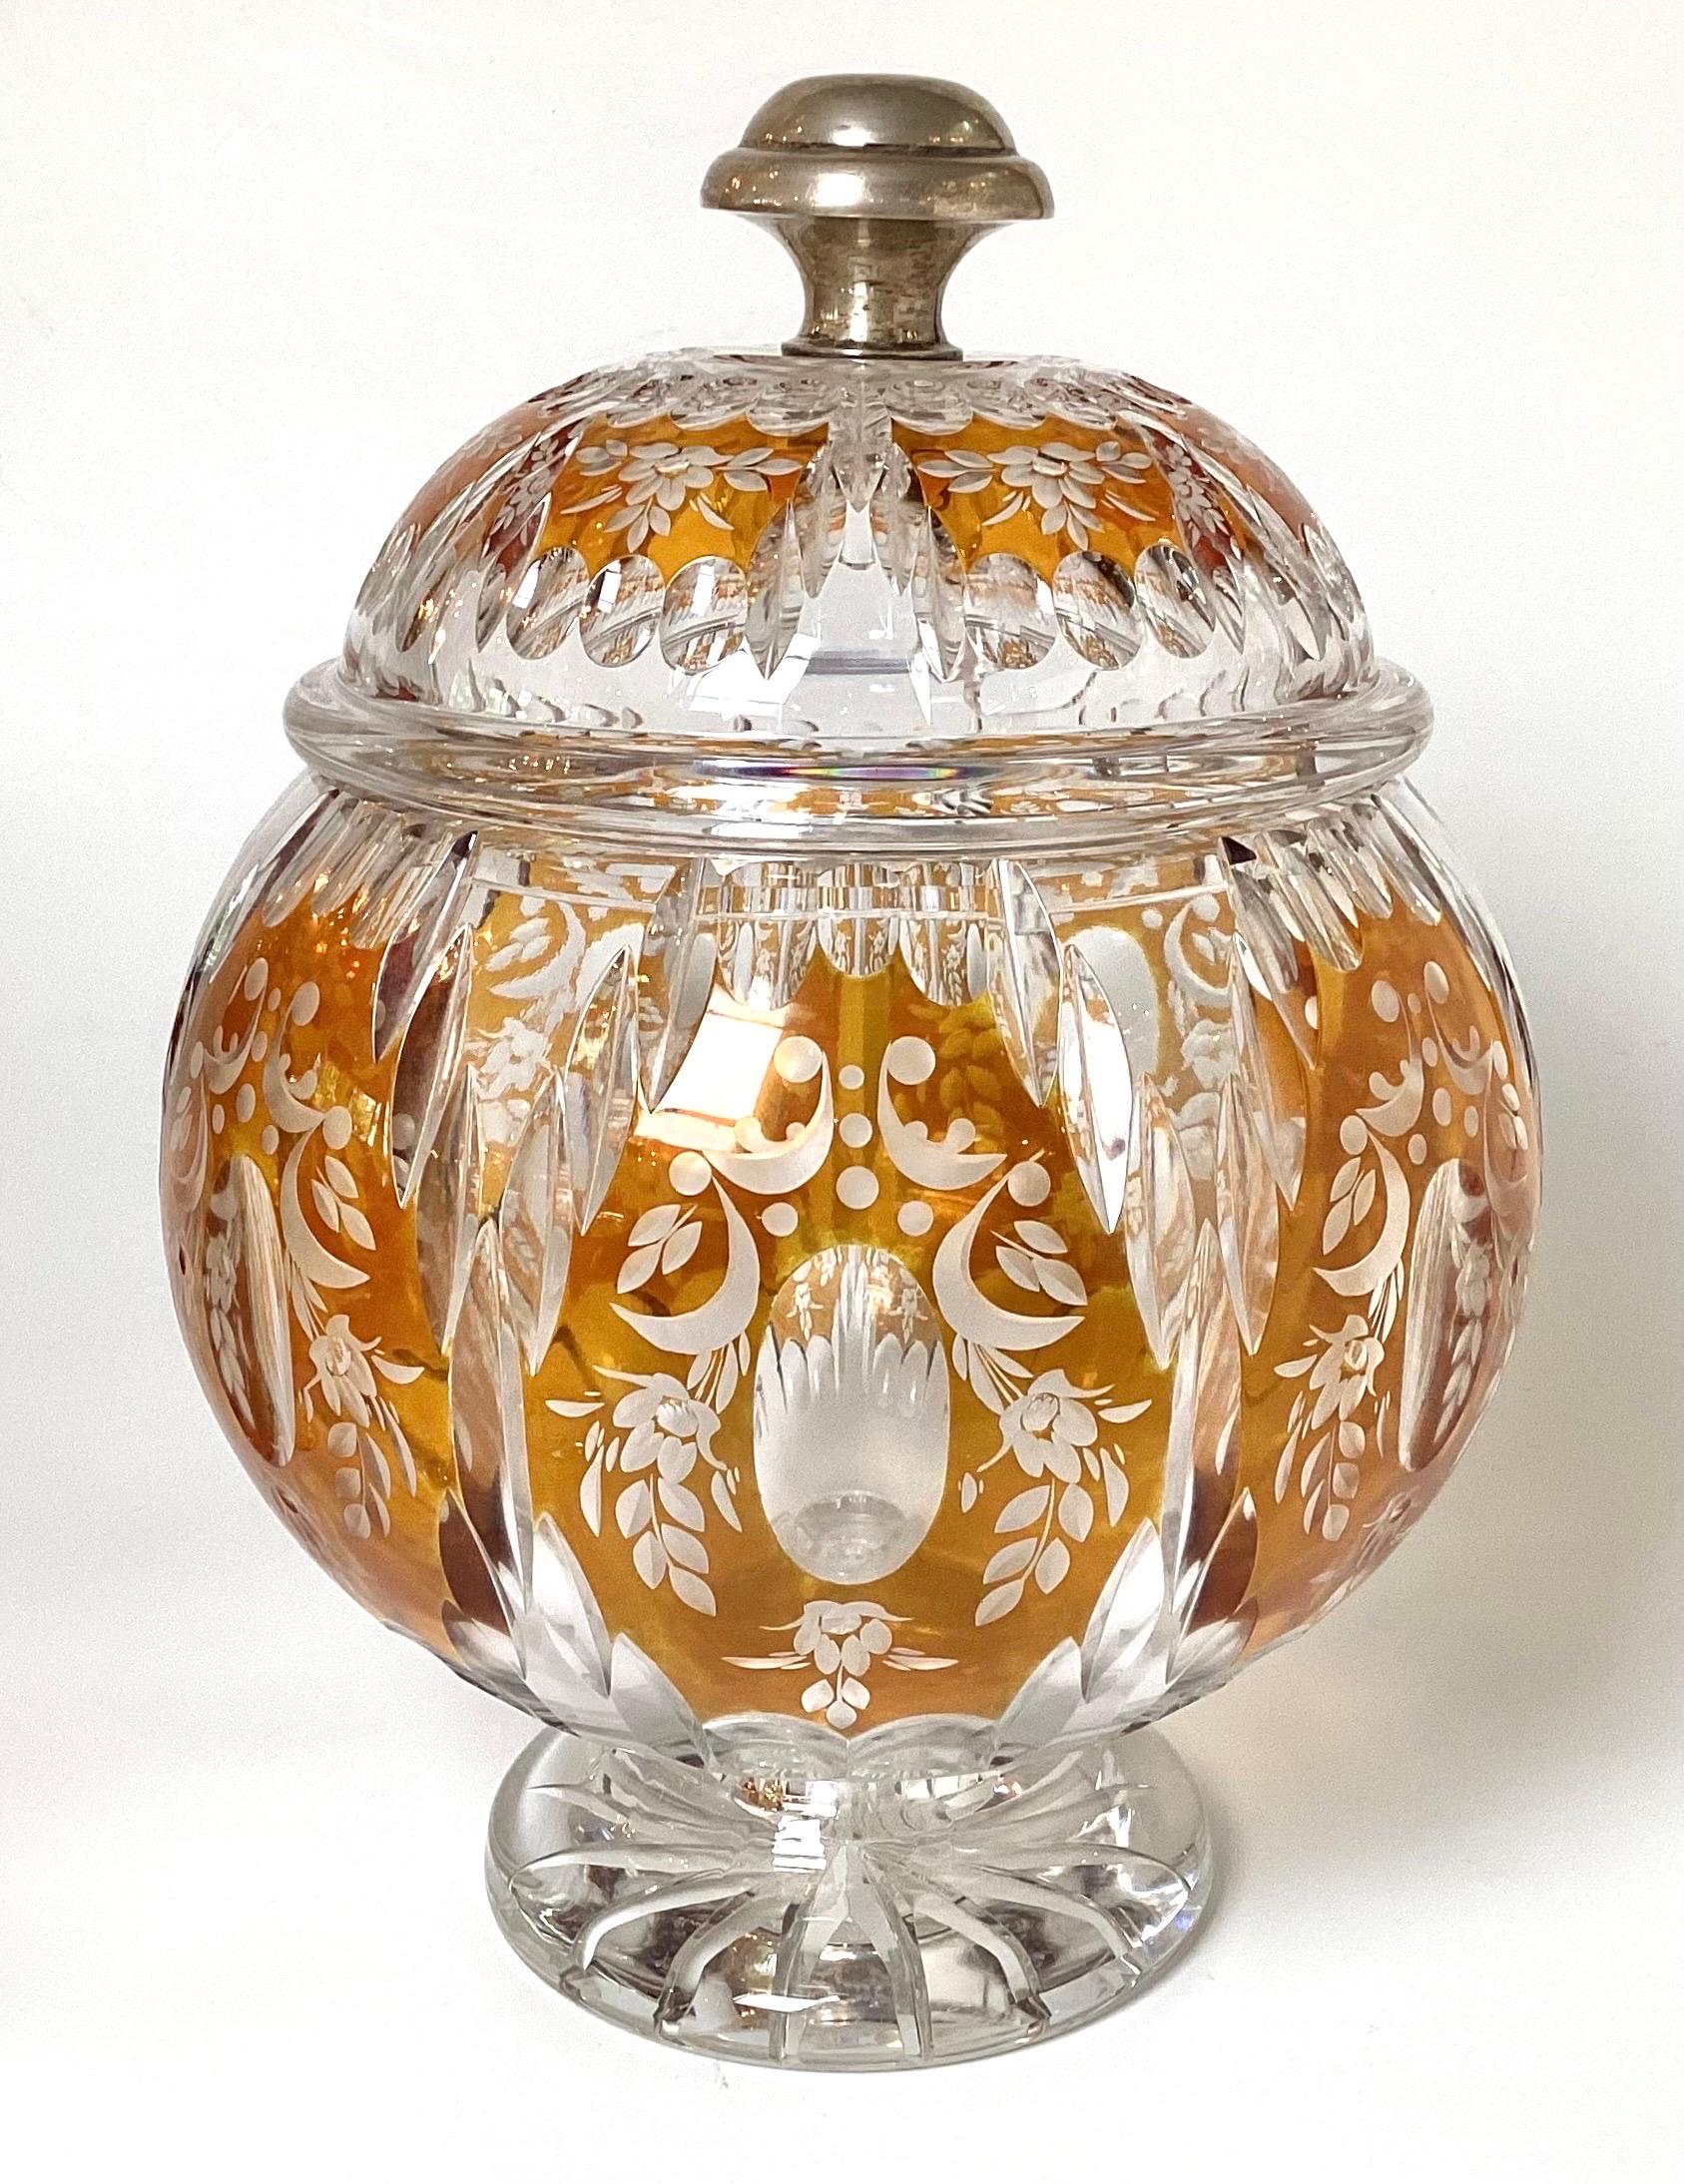 A beautiful amber cut to clear class covered punch bowl set with matching cups. The round bowl with lid with an 800 silver knob, with 10 original matching cups. the punch bowl measures 14 inches high, 10 inches diameter with the body in amber and